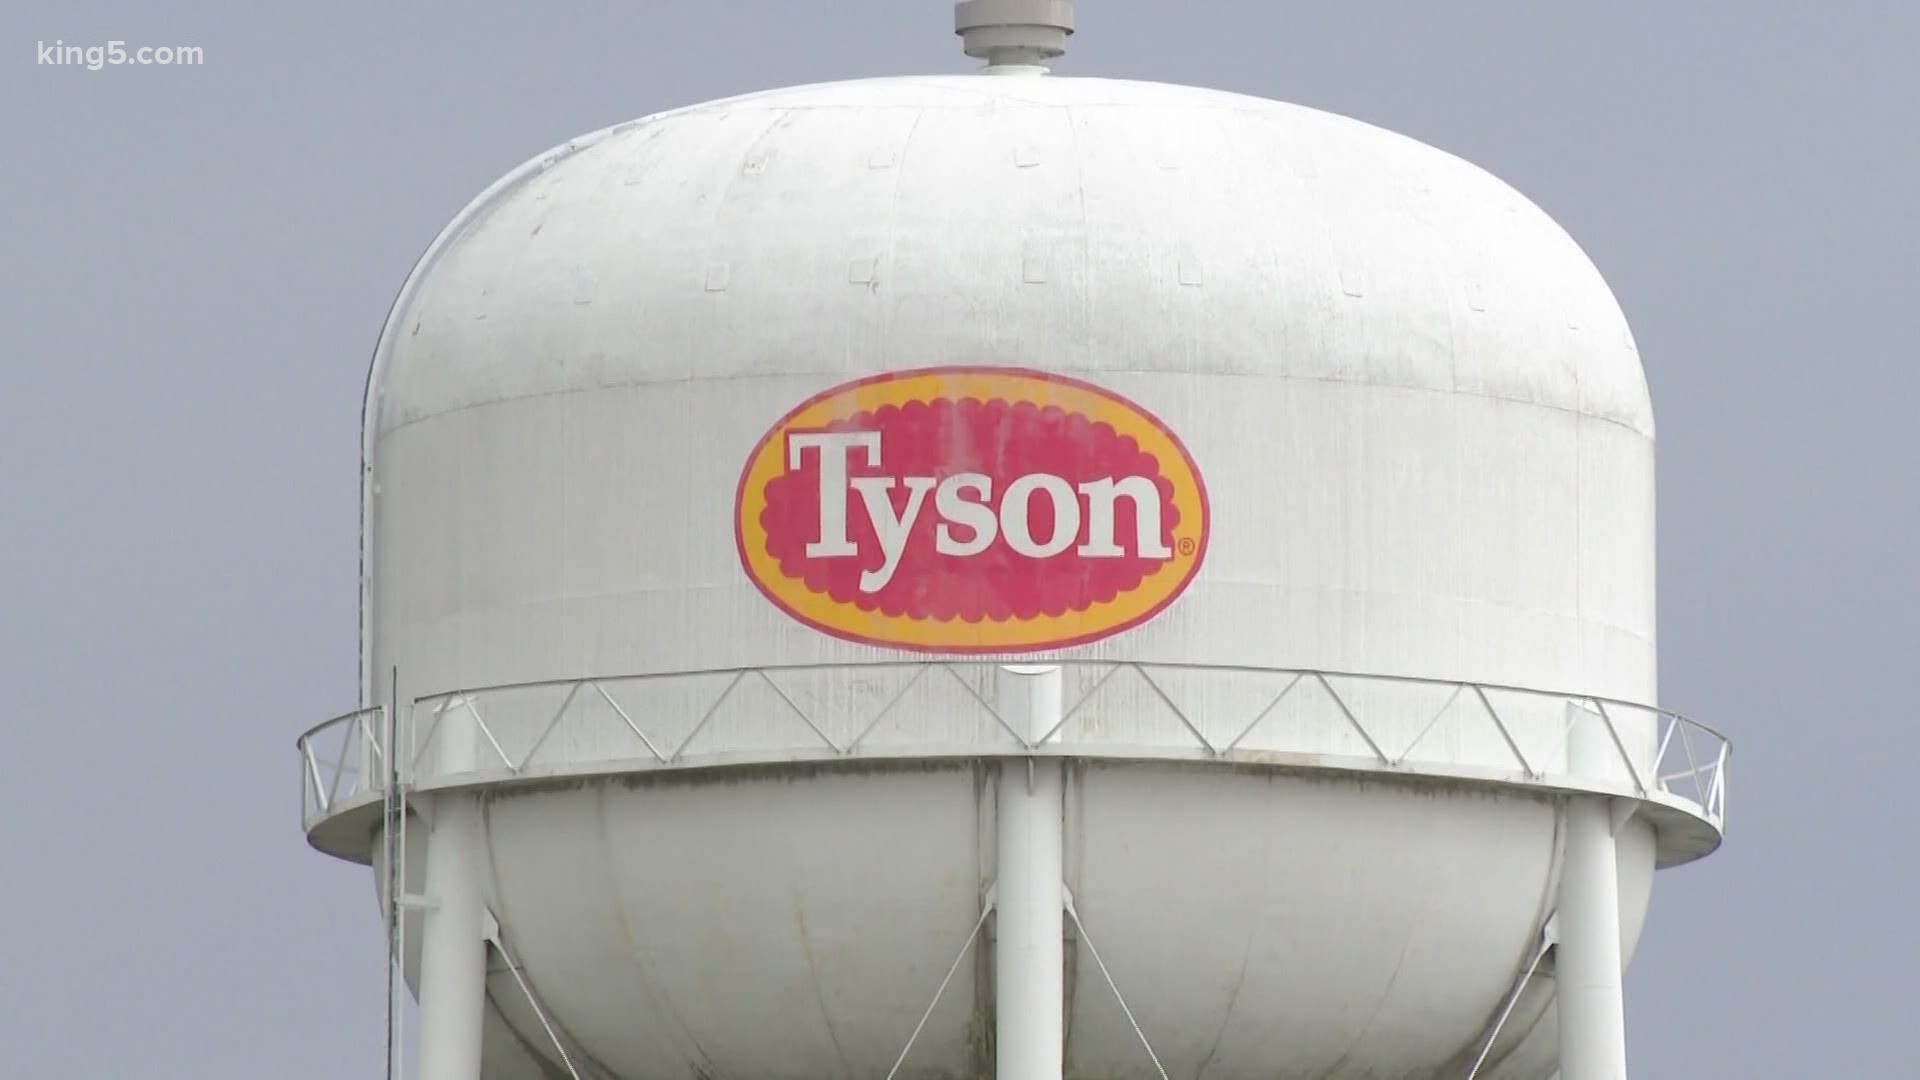 A Tyson meat plant near the Tri-Cities closed after 100 employees tested positive for coronavirus.